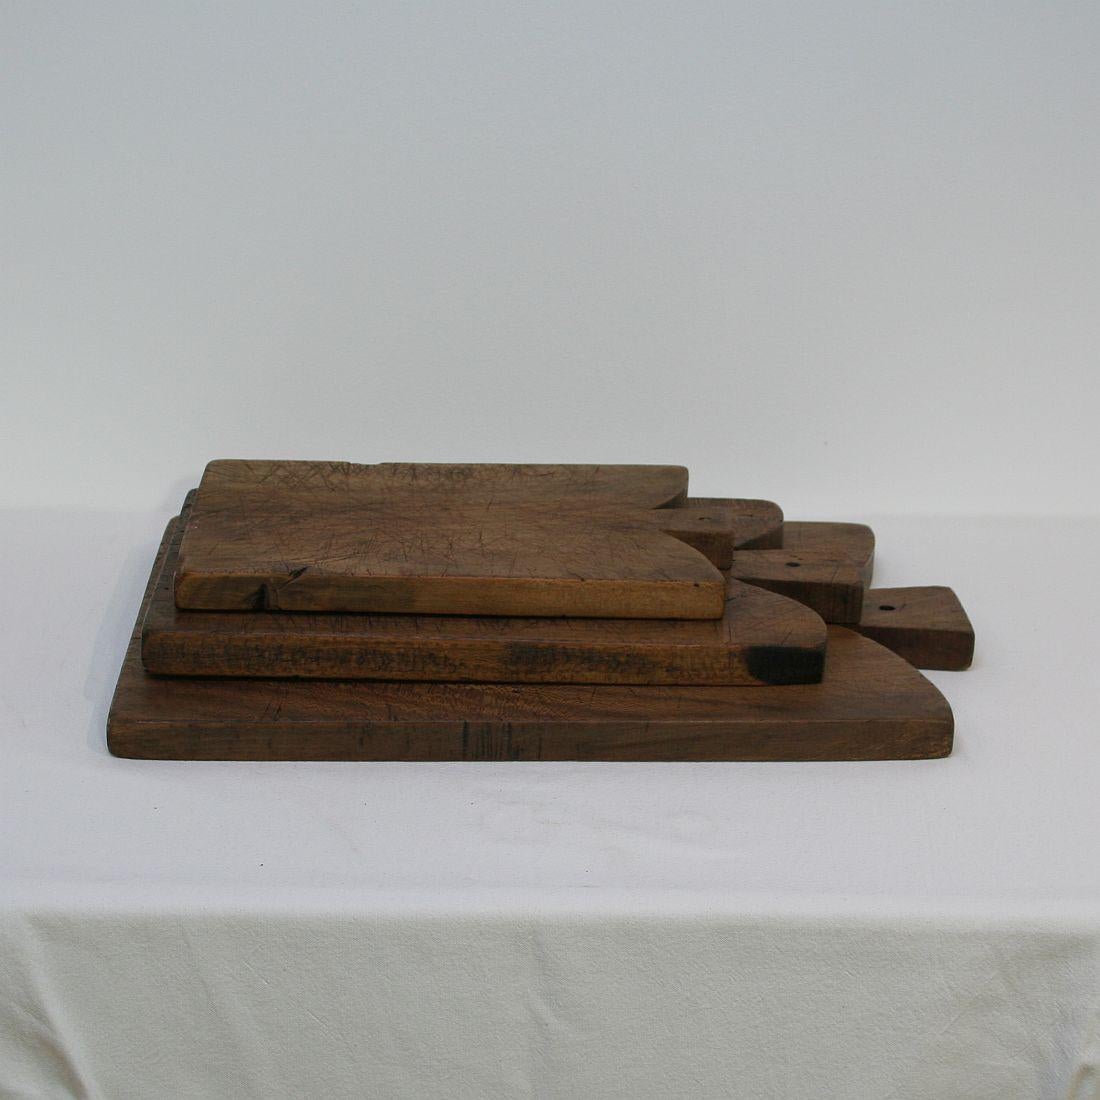 Beautiful small collection of three wooden chopping-cutting boards. Great statement on your counter-top.
France, circa 1850-1900. Weathered.
Measurement here below is of the largest chopping board.